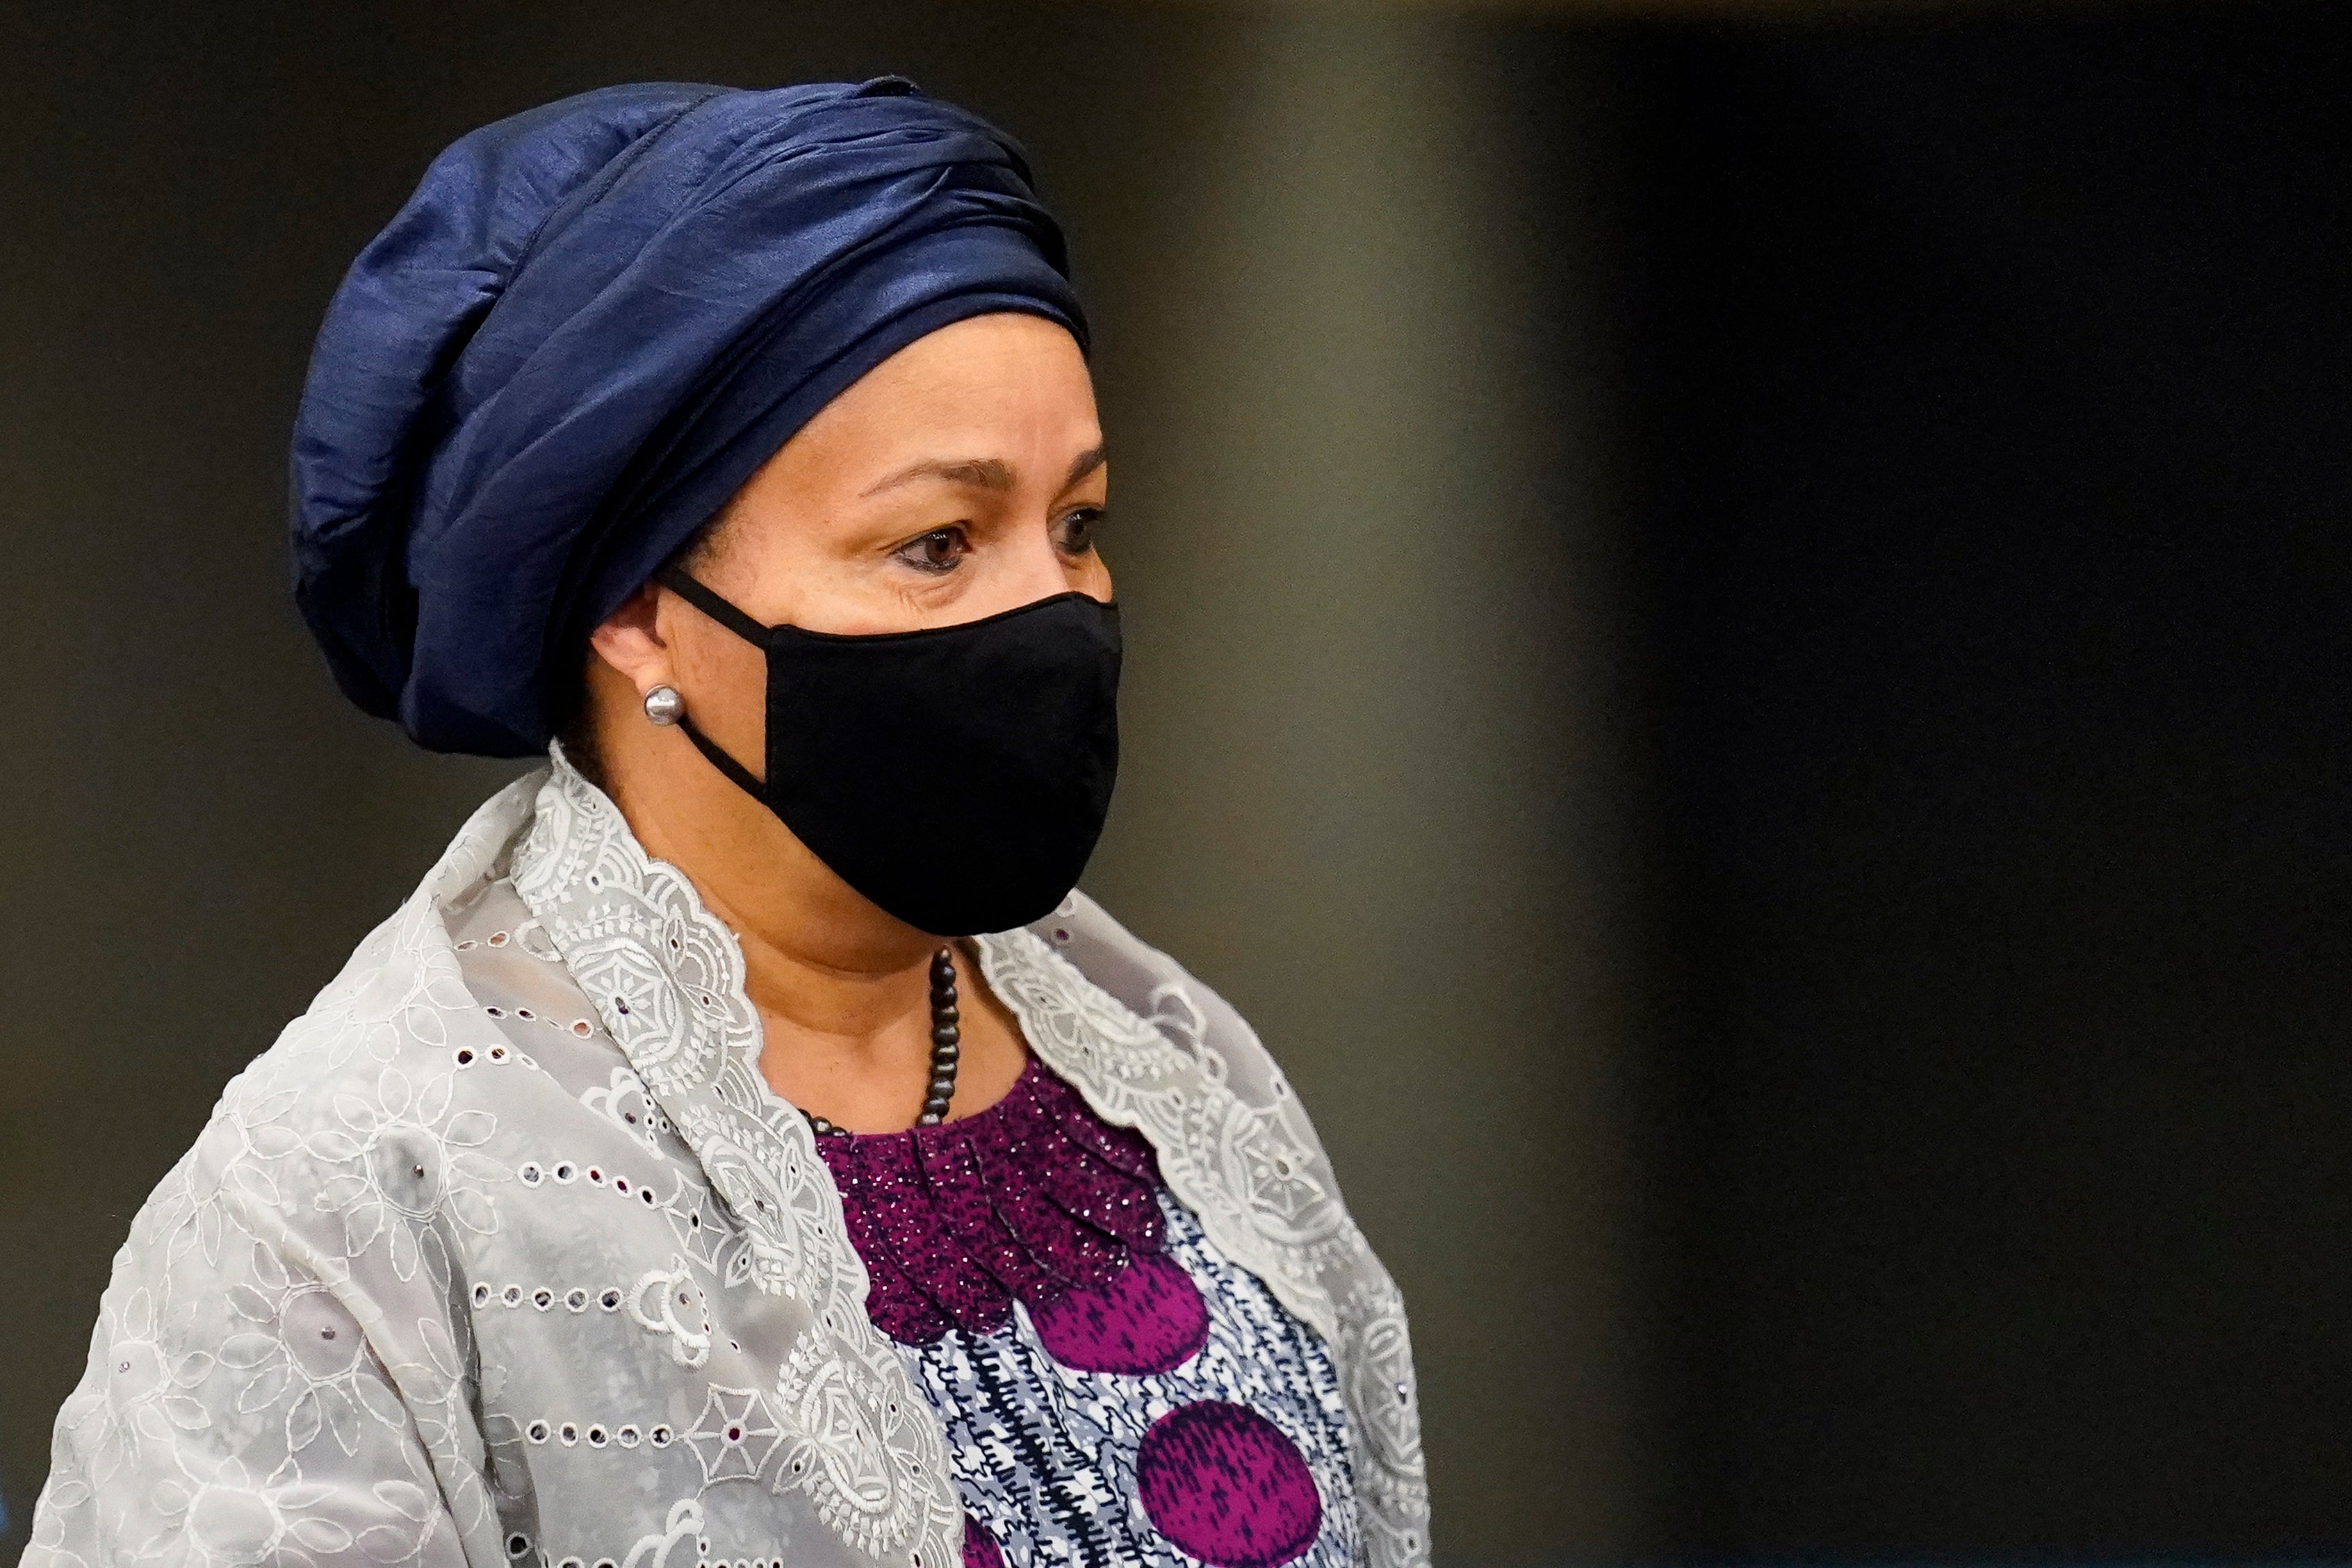 Amina Mohammed, deputy secretary-general of the United Nations, arrives at the UN headquarters